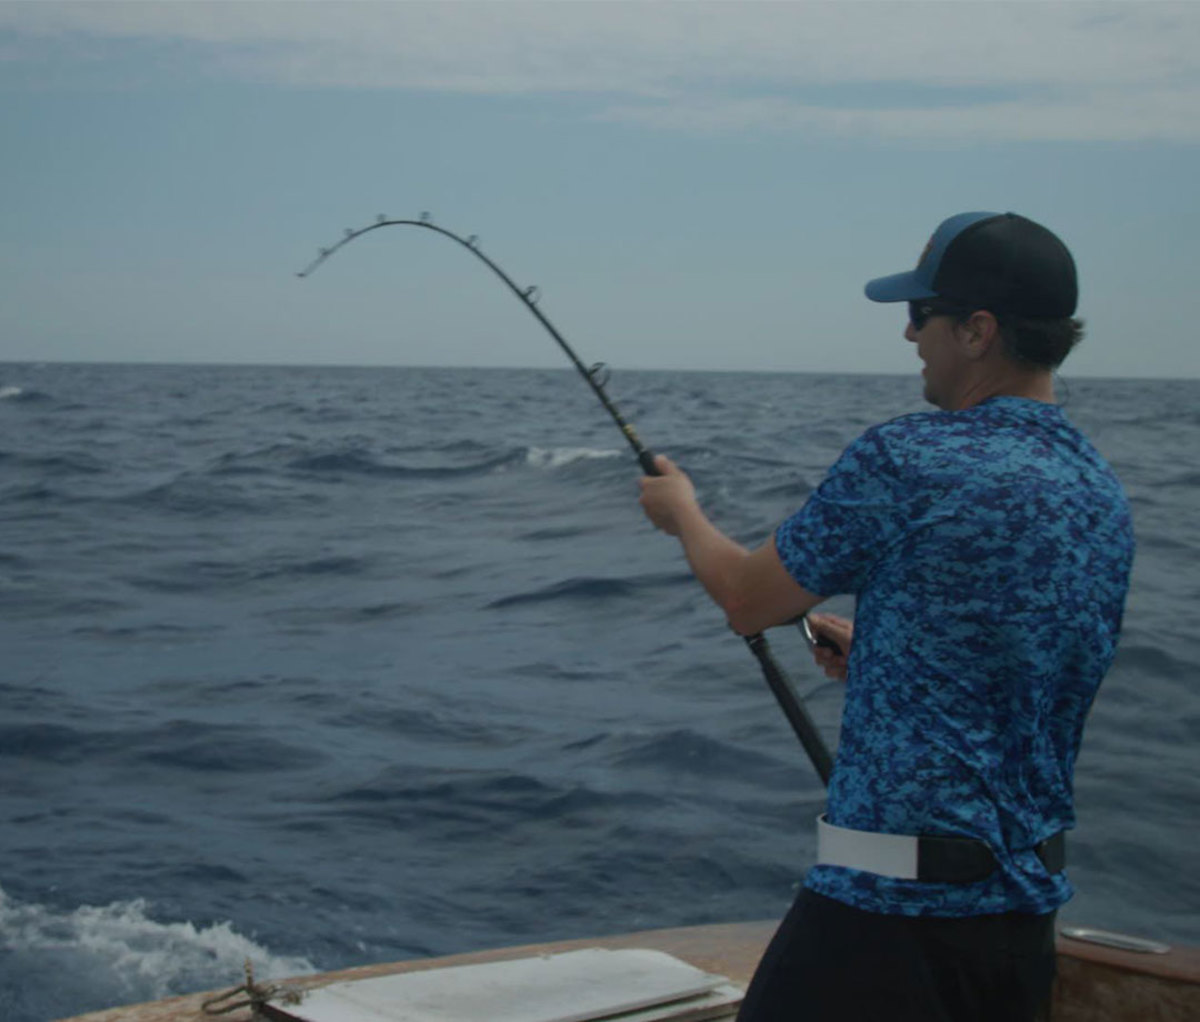 Outfitted & Equipped: Deep Sea Fishing Trip, The Art of Manliness